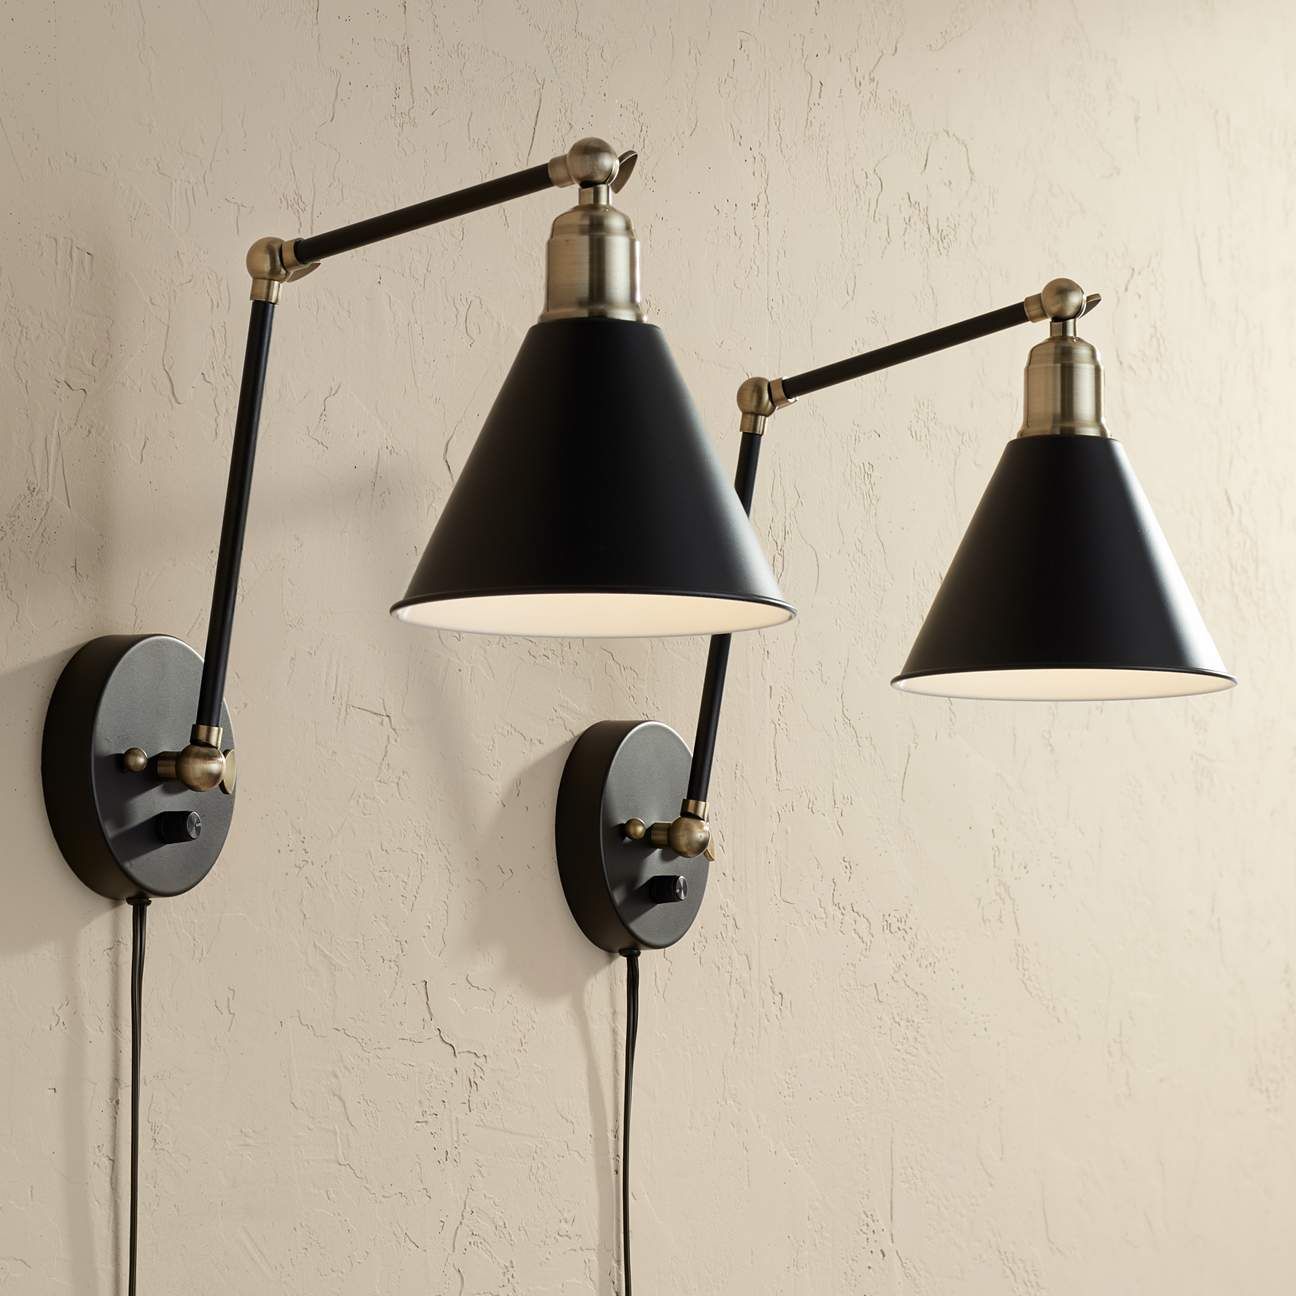 Wray Black and Antique Brass Plug-In Wall Lamp Set of 2 - #9J684 | Lamps Plus | LampsPlus.com